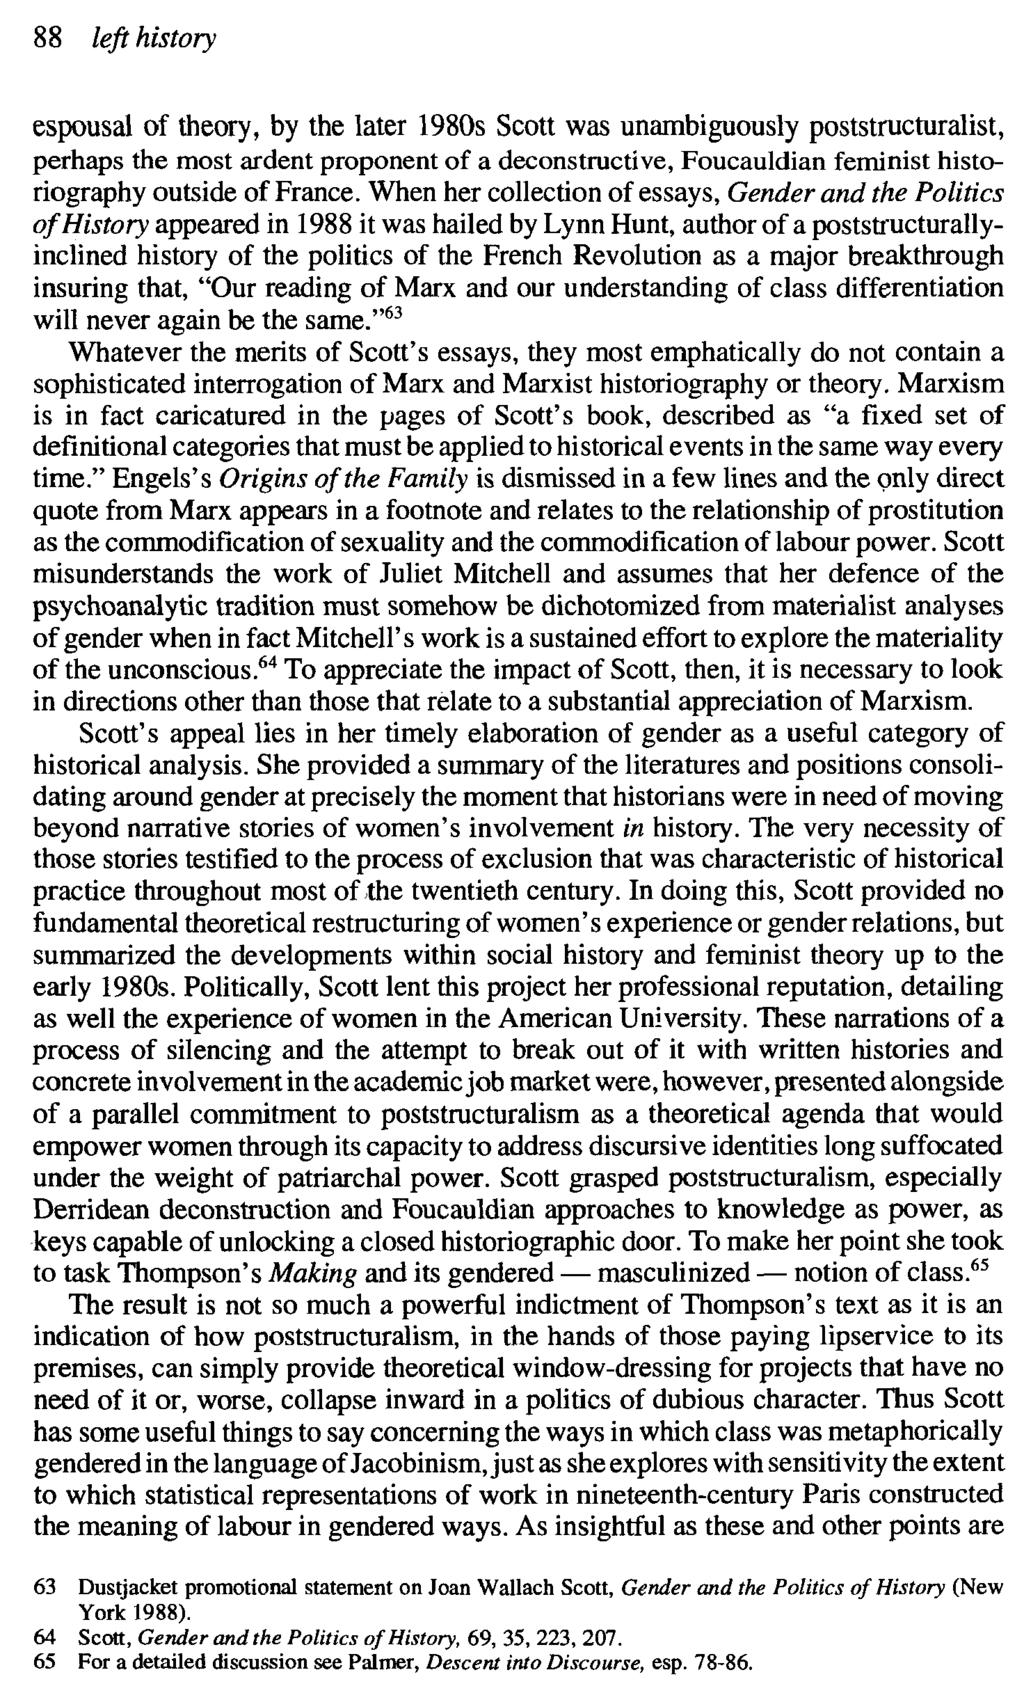 88 left history espousal of theory, by the later 1980s Scott was unambiguously poststructuralist, perhaps the most ardent proponent of a deconstructive, Foucauldian feminist historiography outside of